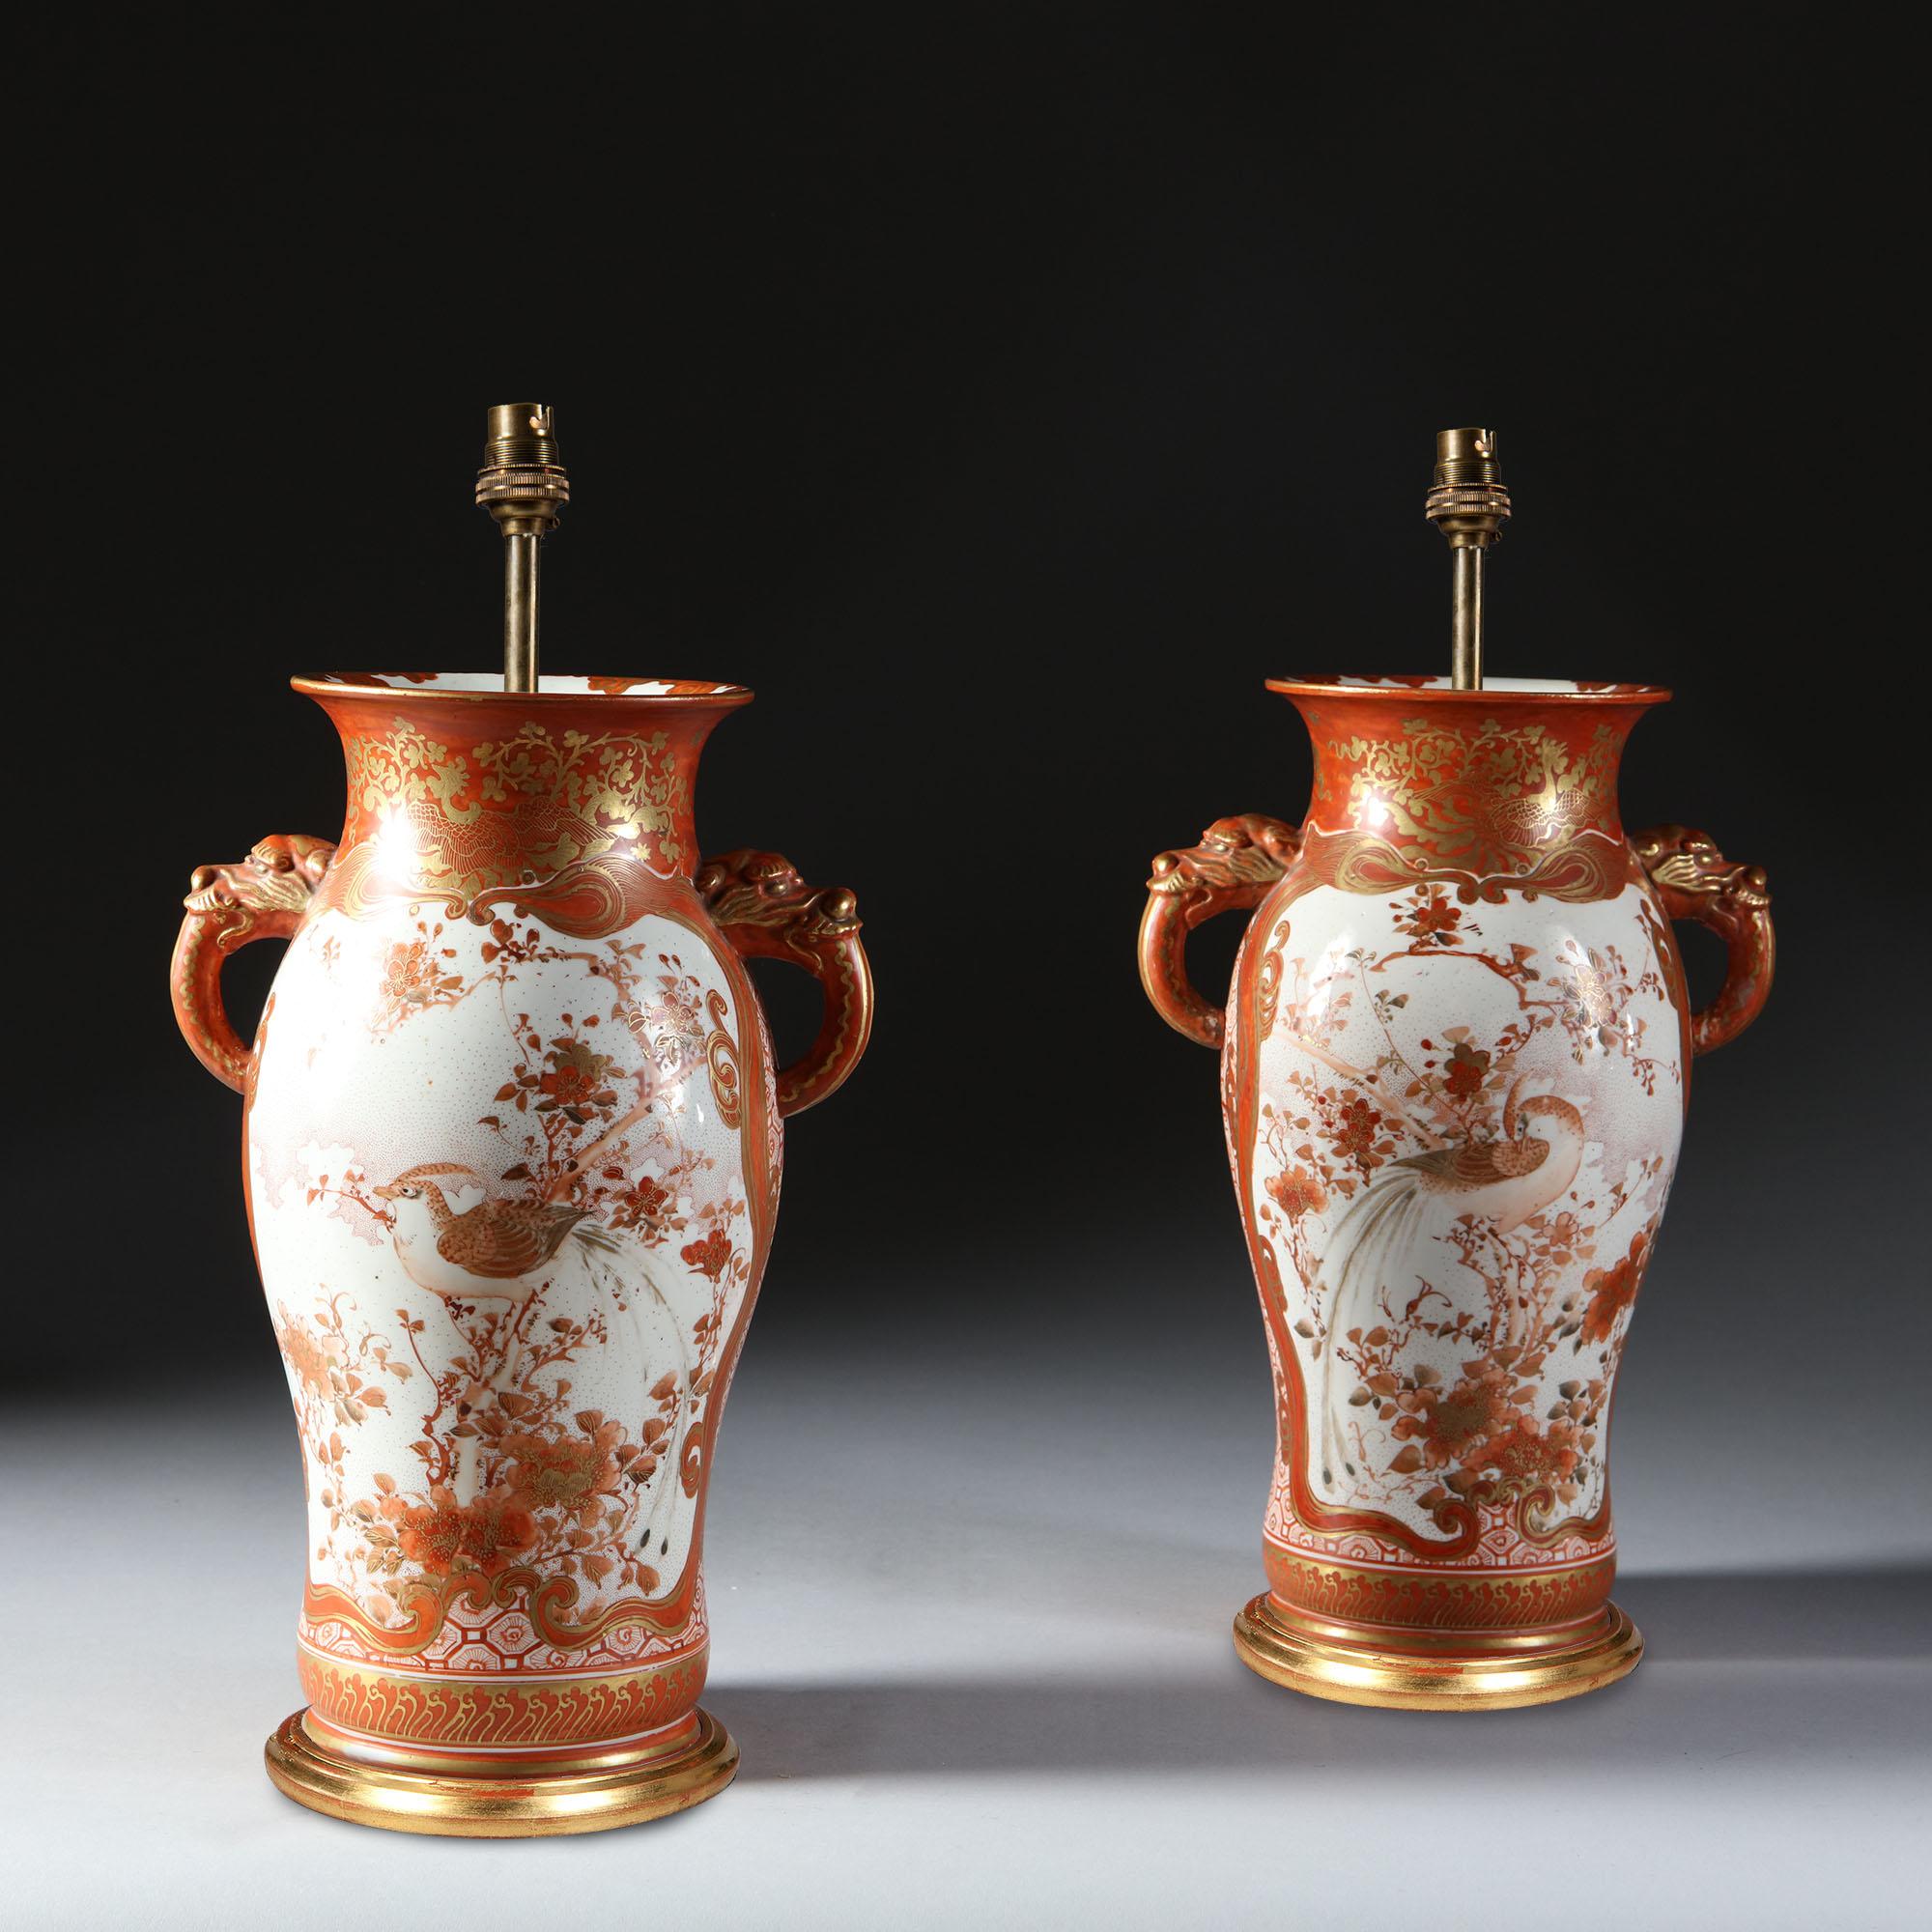 A fine pair of late 19th century Japanese Satsuma porcelain vases. Decorated with fabulously dressed Samurai warriors and monkey gods on a white ground, the surrounding in coral orange with gold highlights.

Now wired for (USA / UK / Rest of